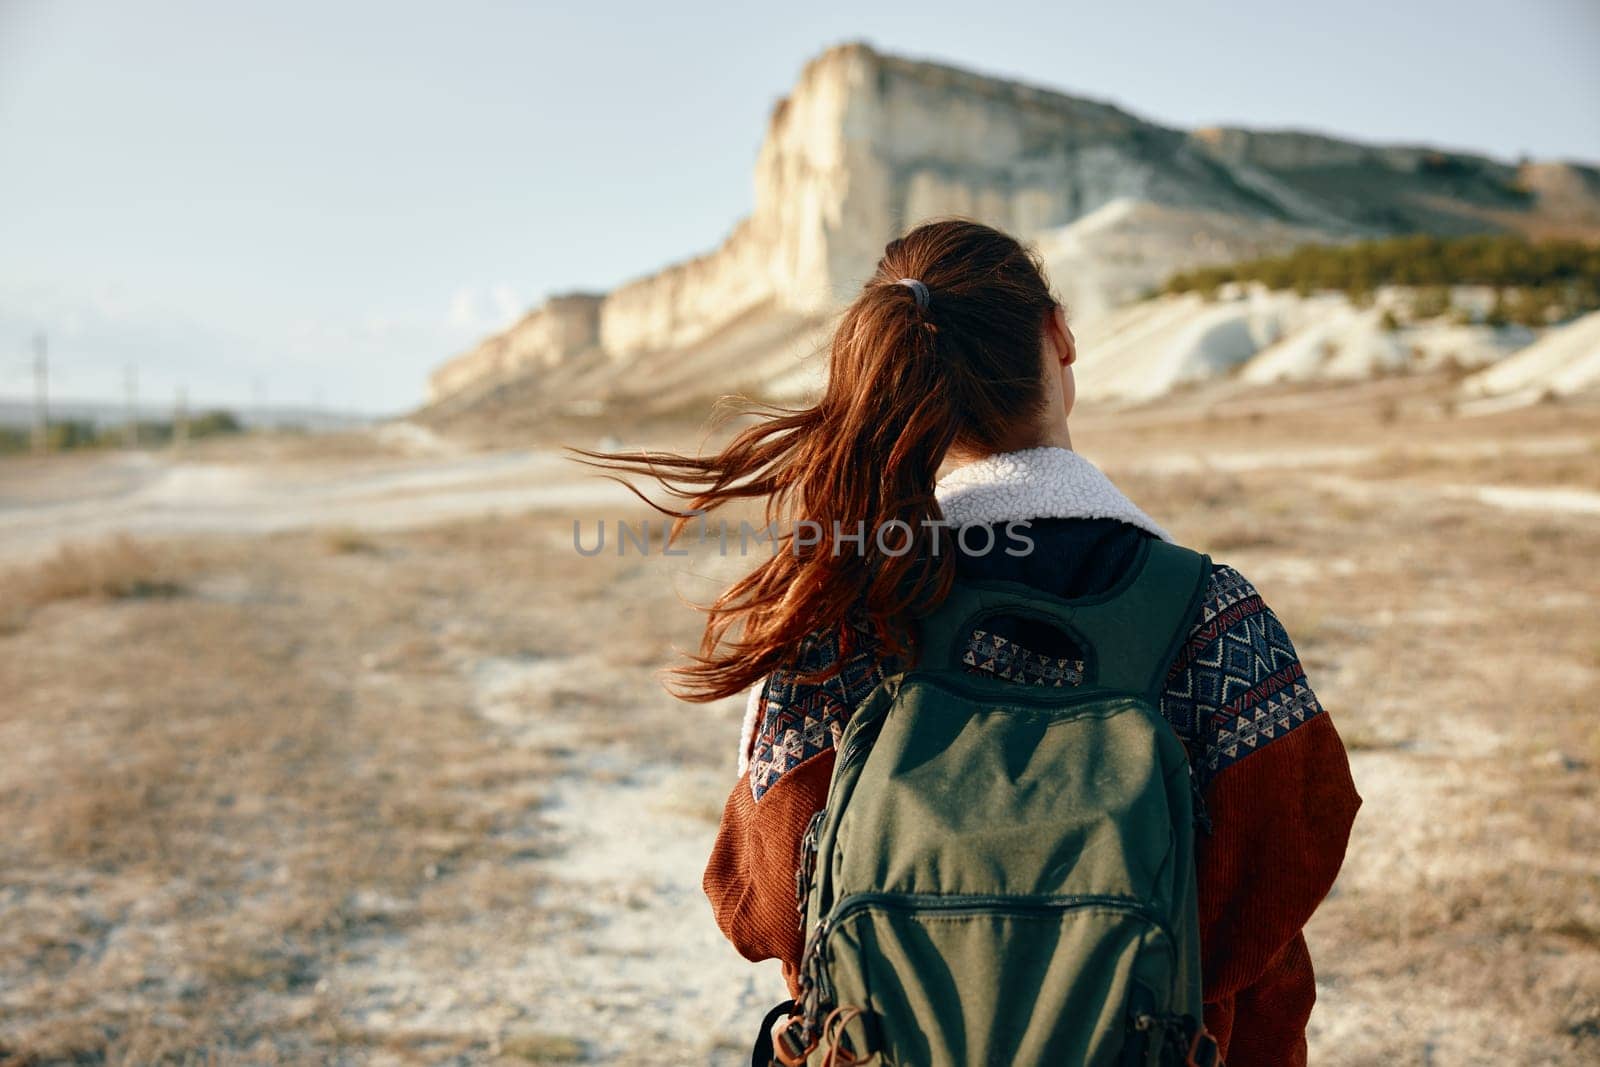 Adventure awaits woman with backpack in front of majestic mountain with desert landscape in background